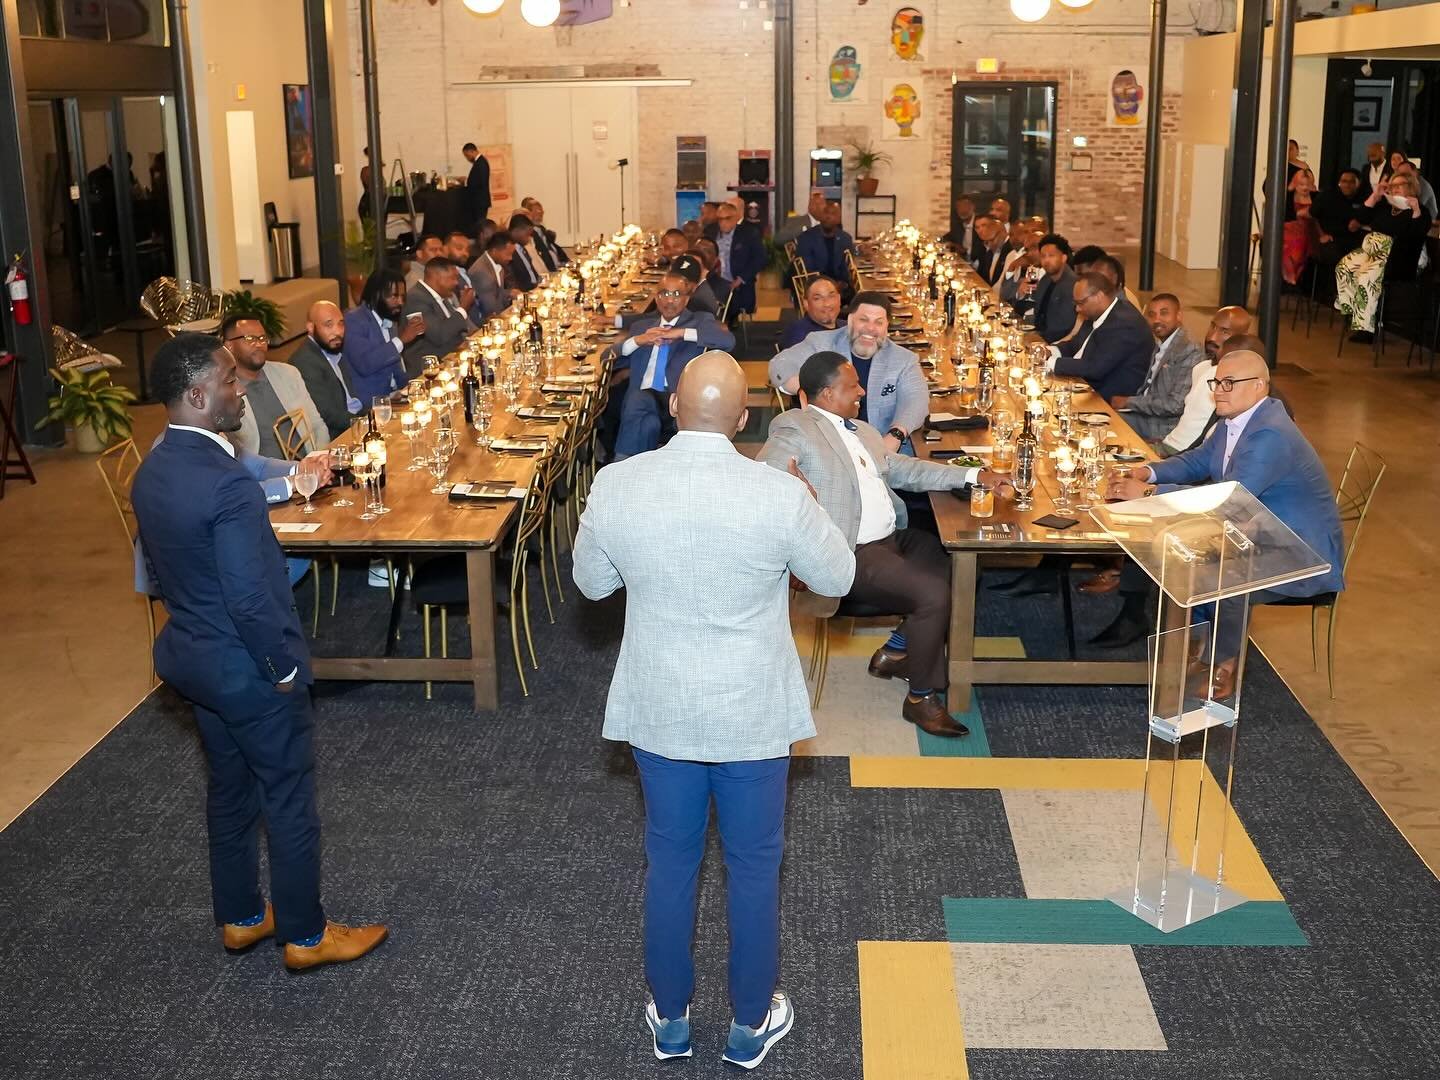 We&rsquo;re sending a major thank you to Son of a Saint Board members Cleveland Spears III, Jerell Thomas, Trajan Langdon, Ryan Burks, Kevin Green, and Peter Hamilton III for leading a successful Men&rsquo;s Dinner Fundraiser for Son of a Saint on Ap